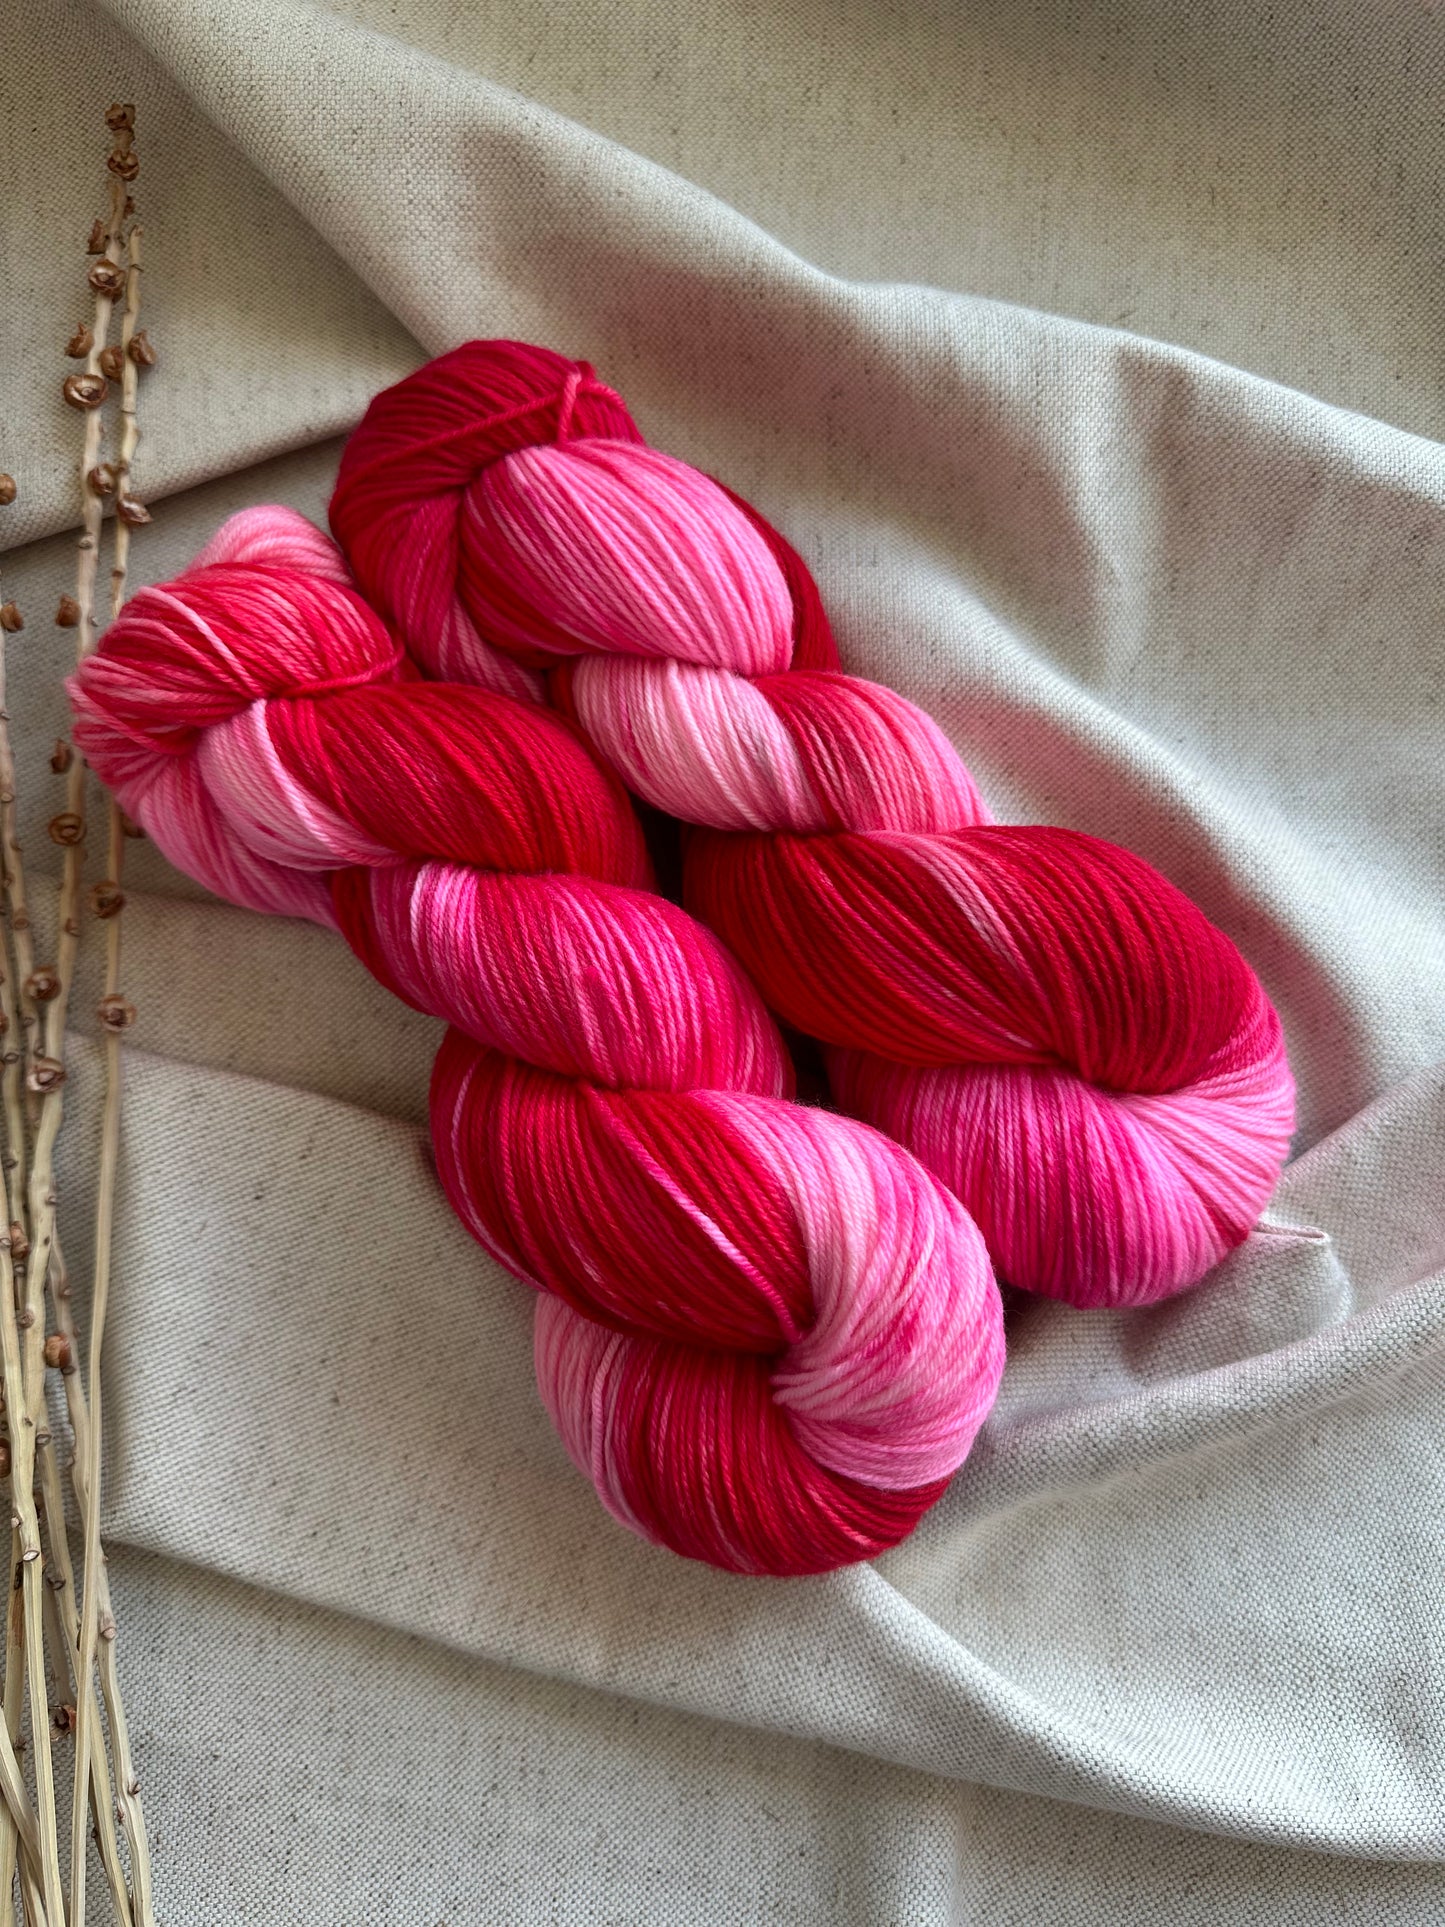 Let Me Call You Sweetheart 100g Skein